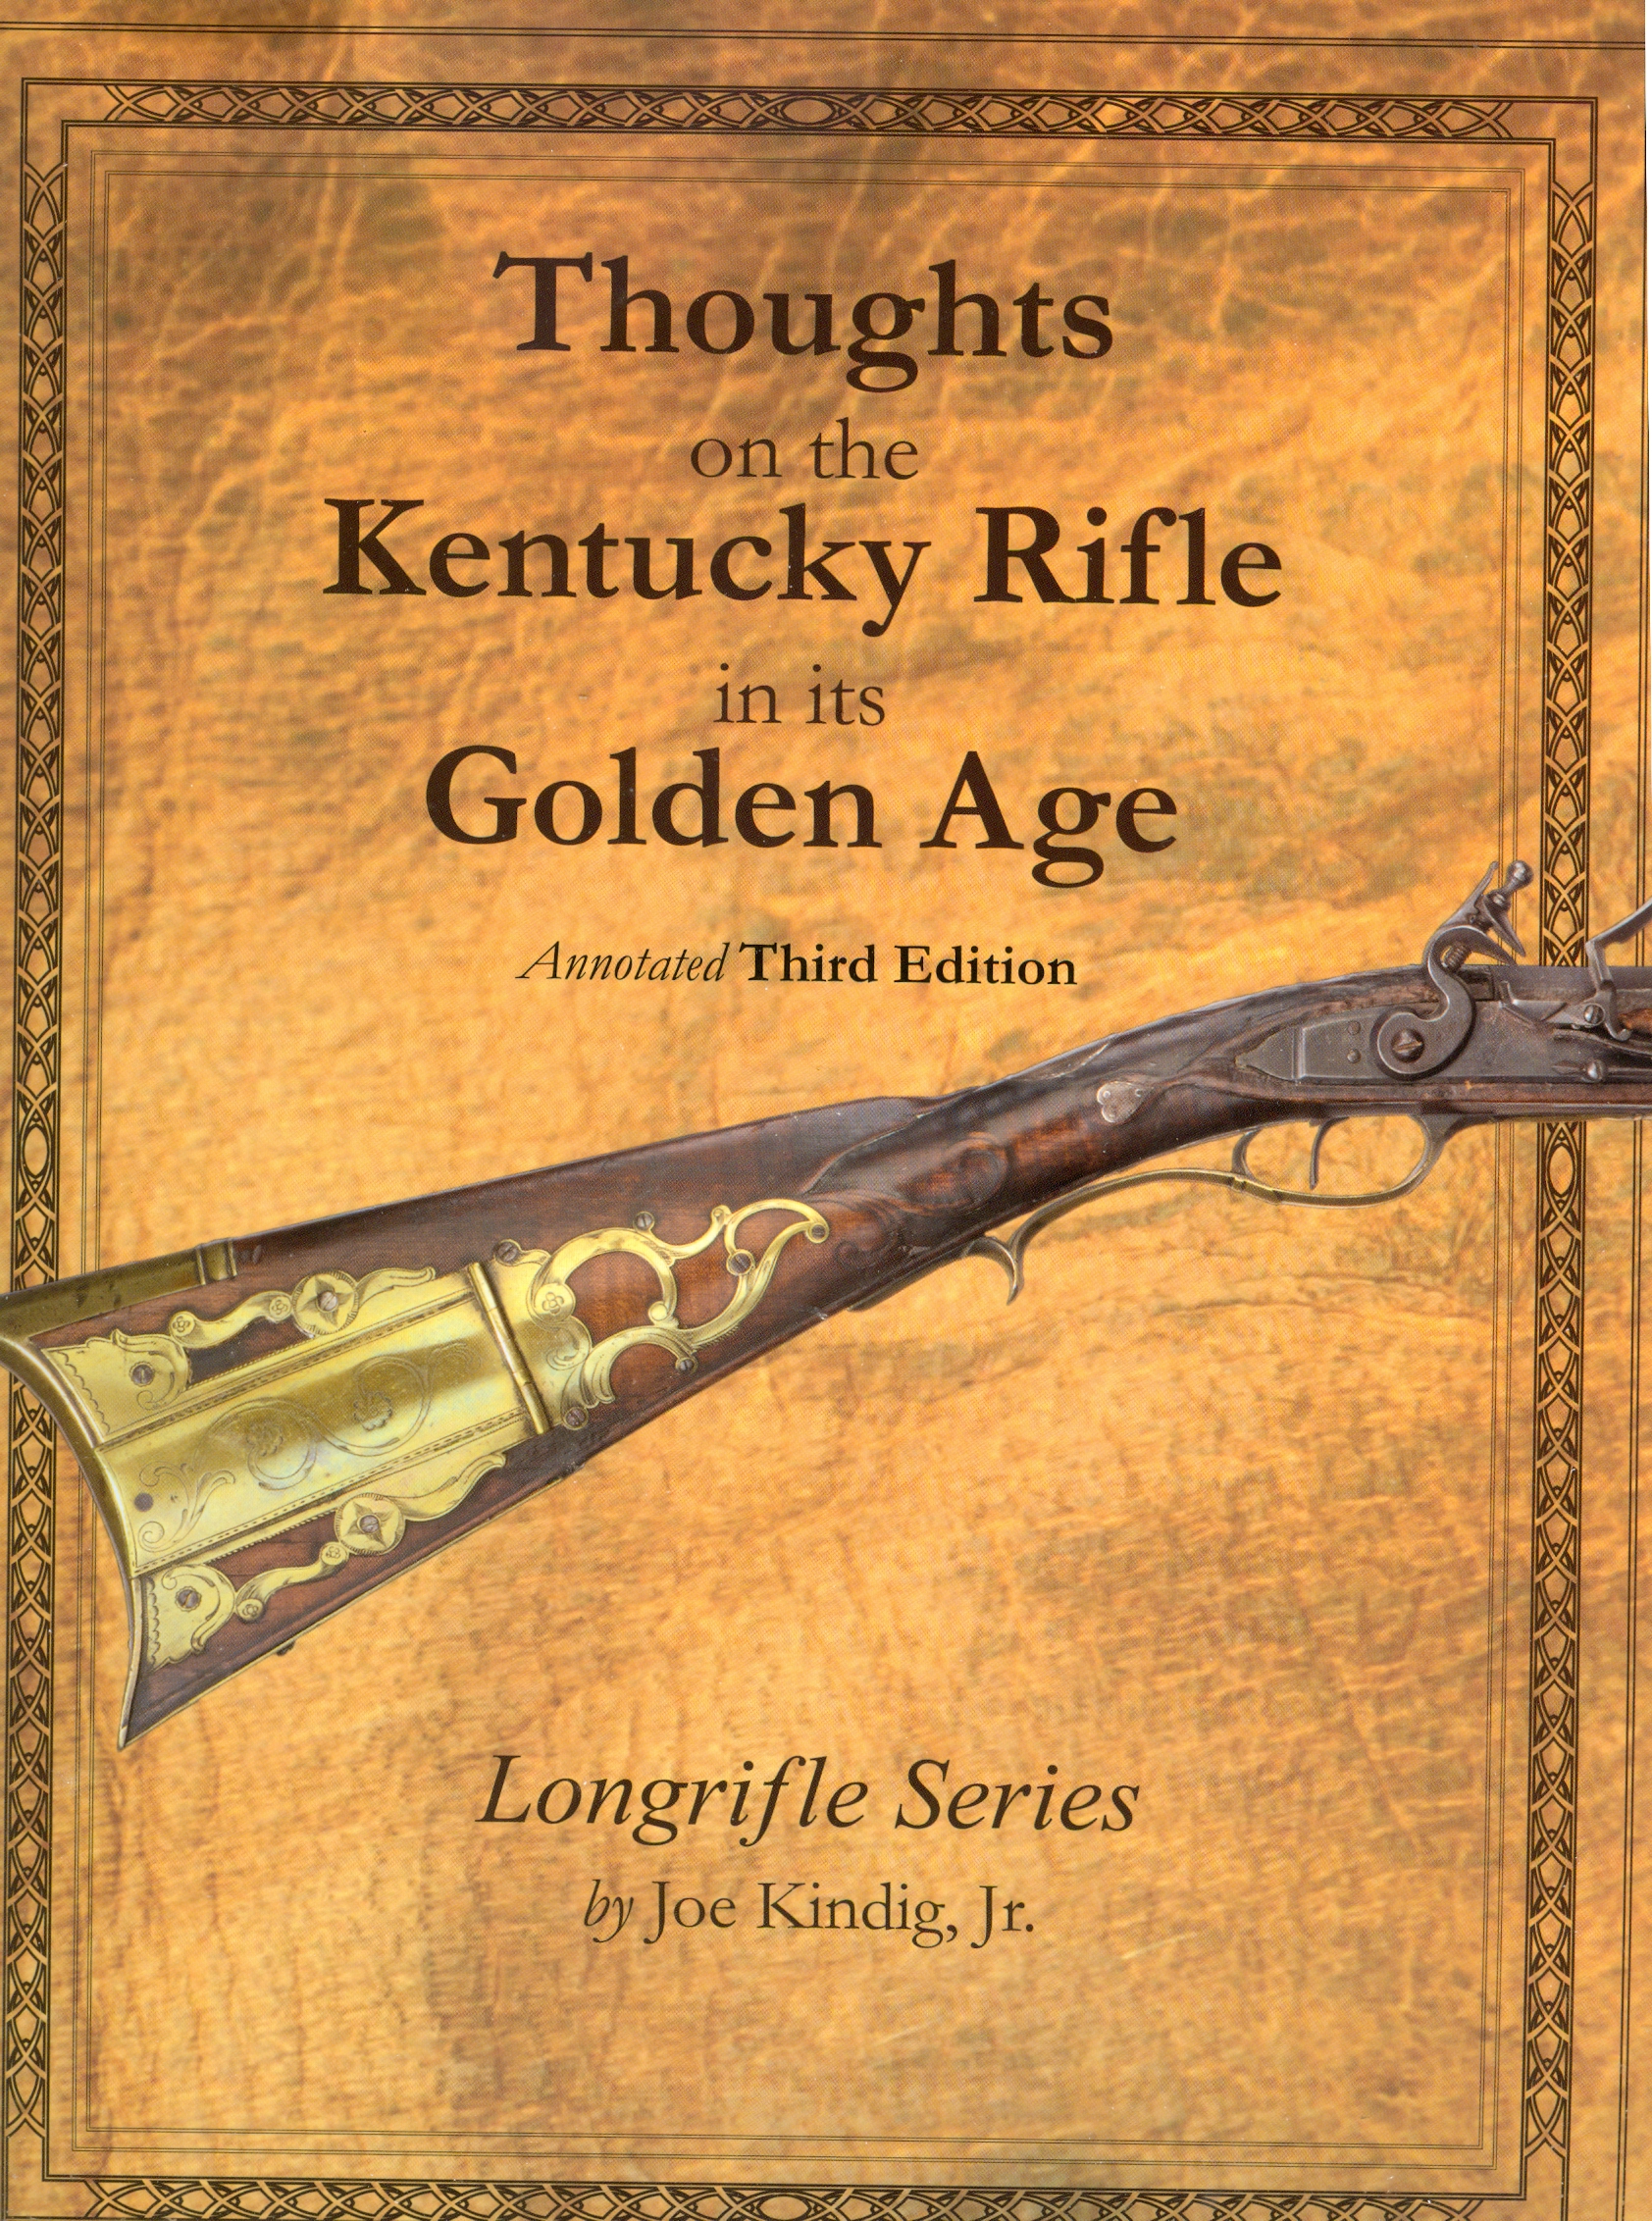 Thoughts On The Kentucky Rifle in its Golden Age